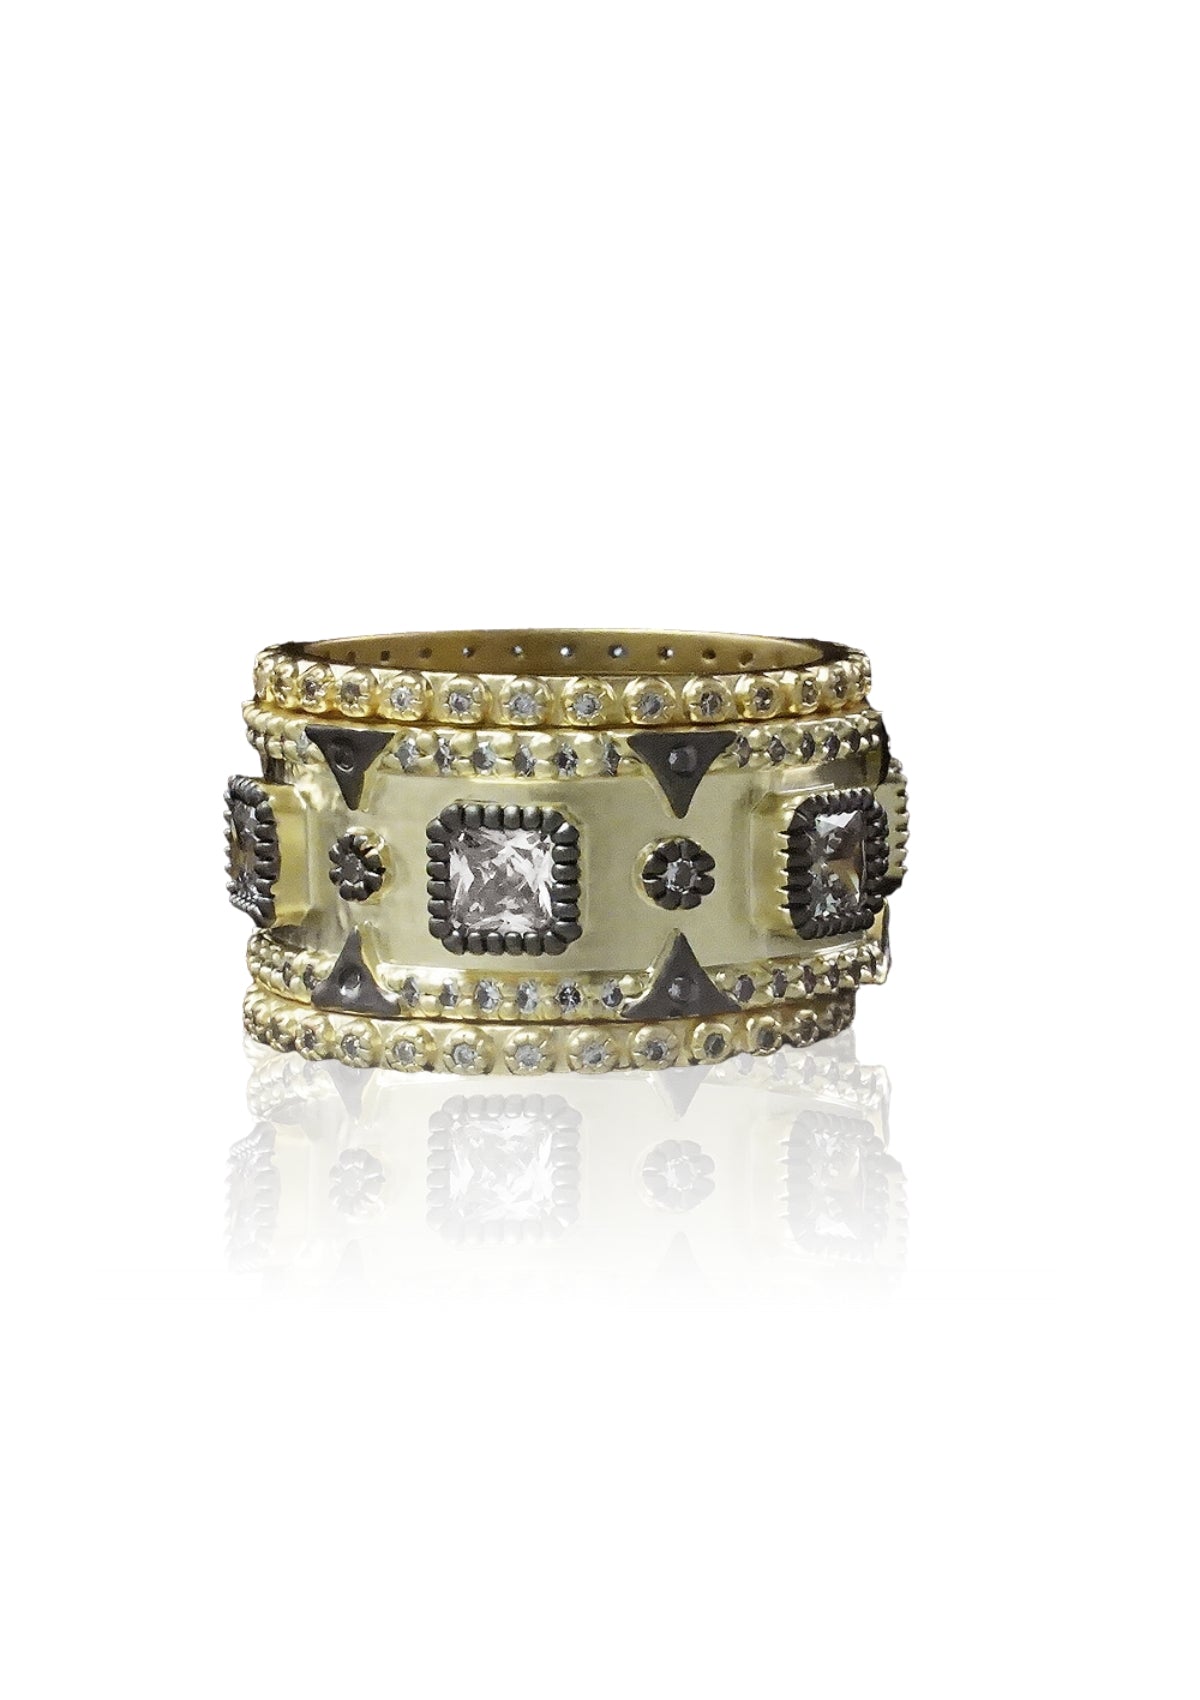 Gold stackable rings with square stones and black accents.